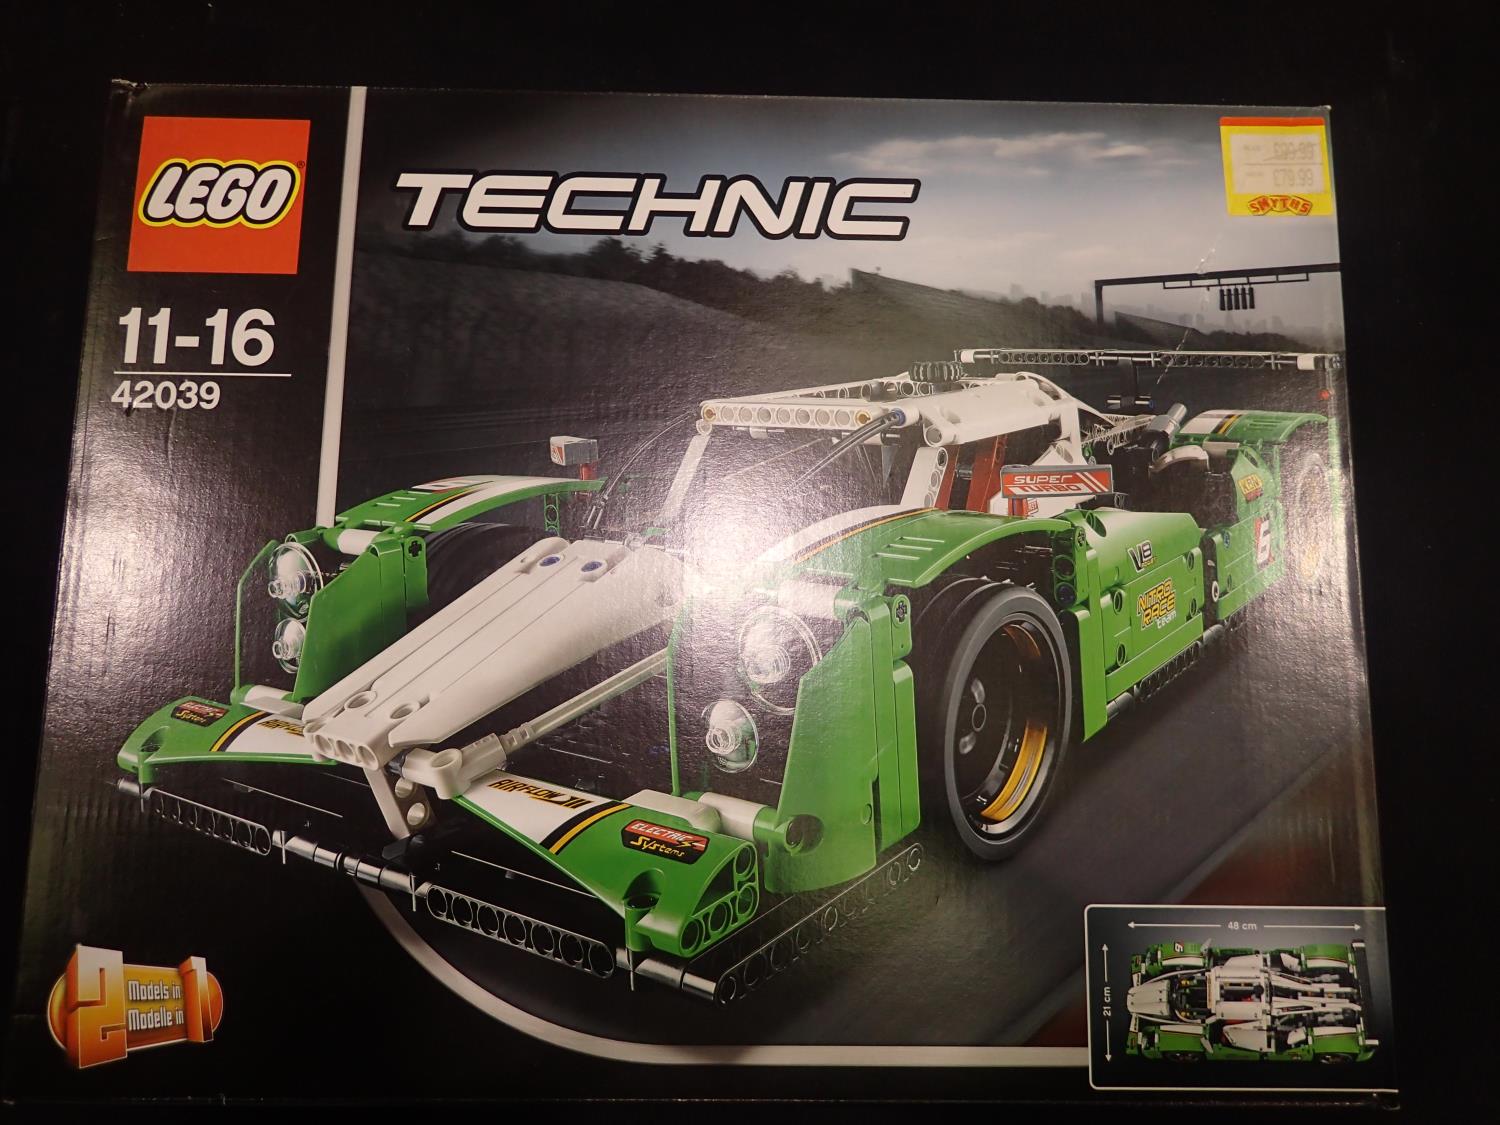 Lego Technic 42039 Le Mans 24hr race car, factory sealed. UK P&P Group 2 (£20+VAT for the first